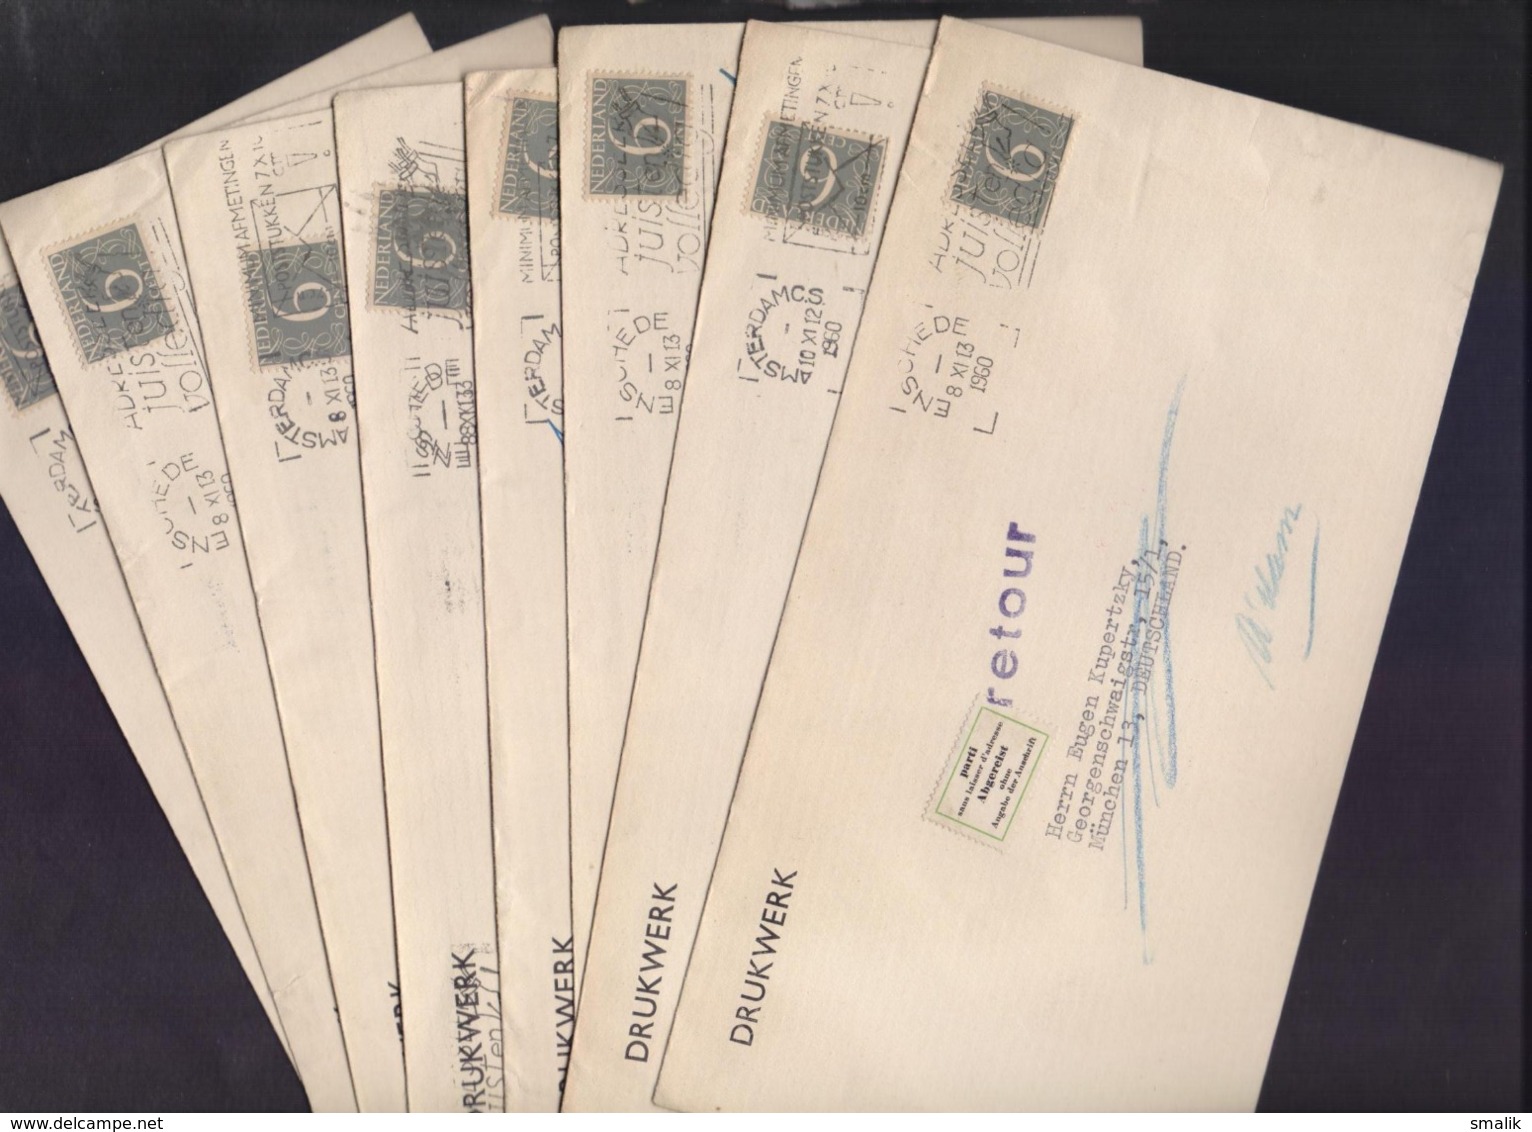 NETHERLANDS Postal History - Return To Sender Retour Cover Used With 6c Stamp, Lot Of 15 Covers - Covers & Documents